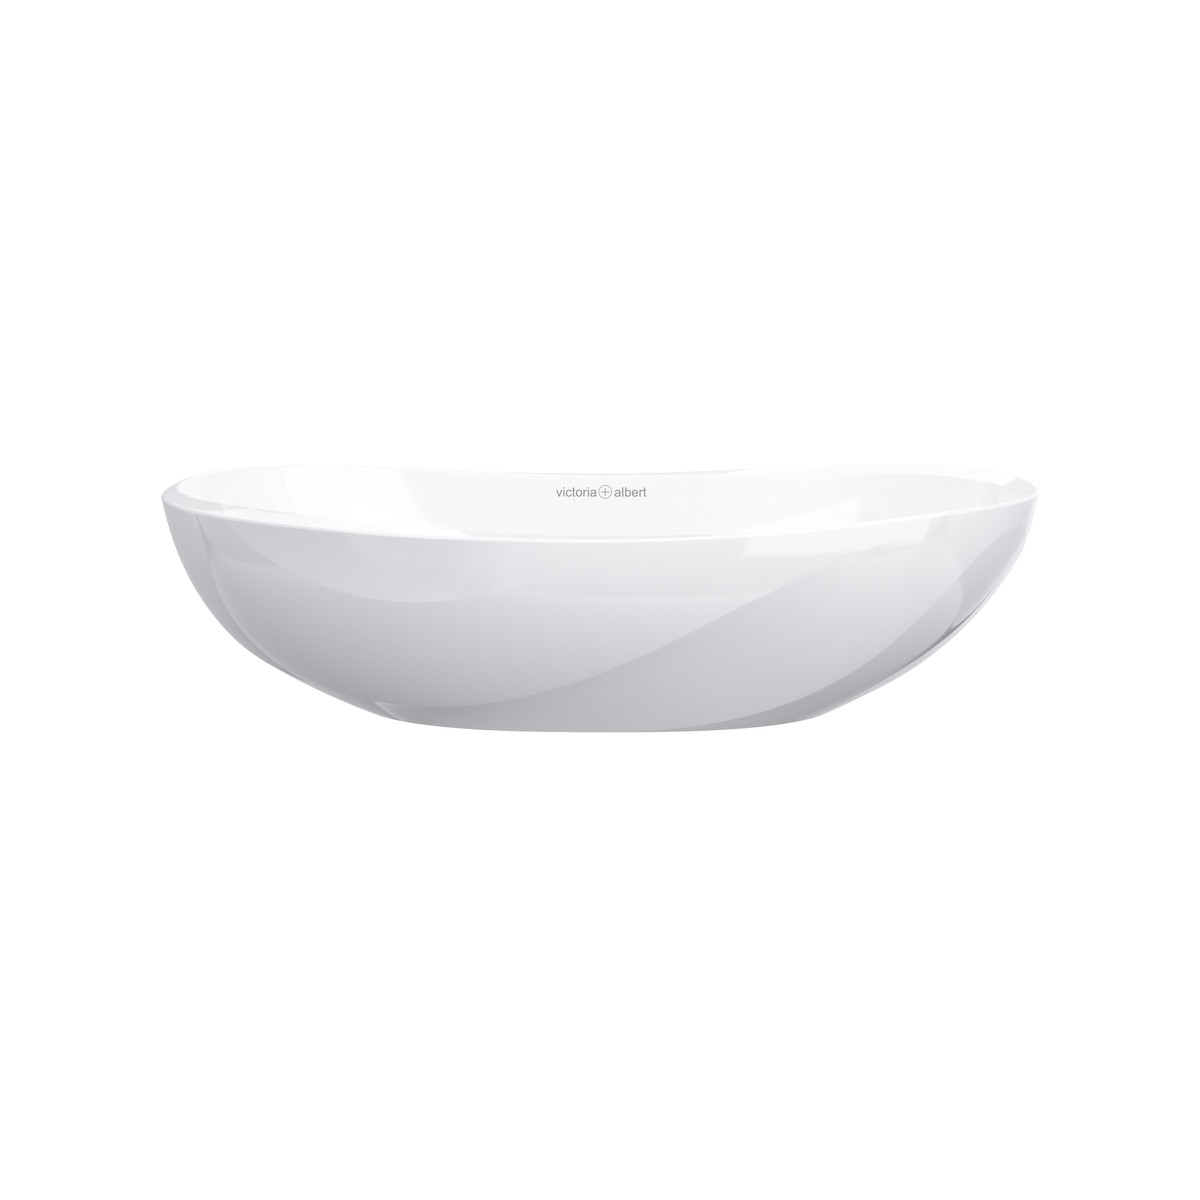 Victoria + Albert Seros 55 Countertop Basin, sculpted wave design stone vessel basin inspired by Sophie Elizabeth Thompson sculptures. Available in Gloss White and Matt White in bath, vessel basin and pedestal basin formats. Distributed in Australia by Luxe by Design, Brisbane.